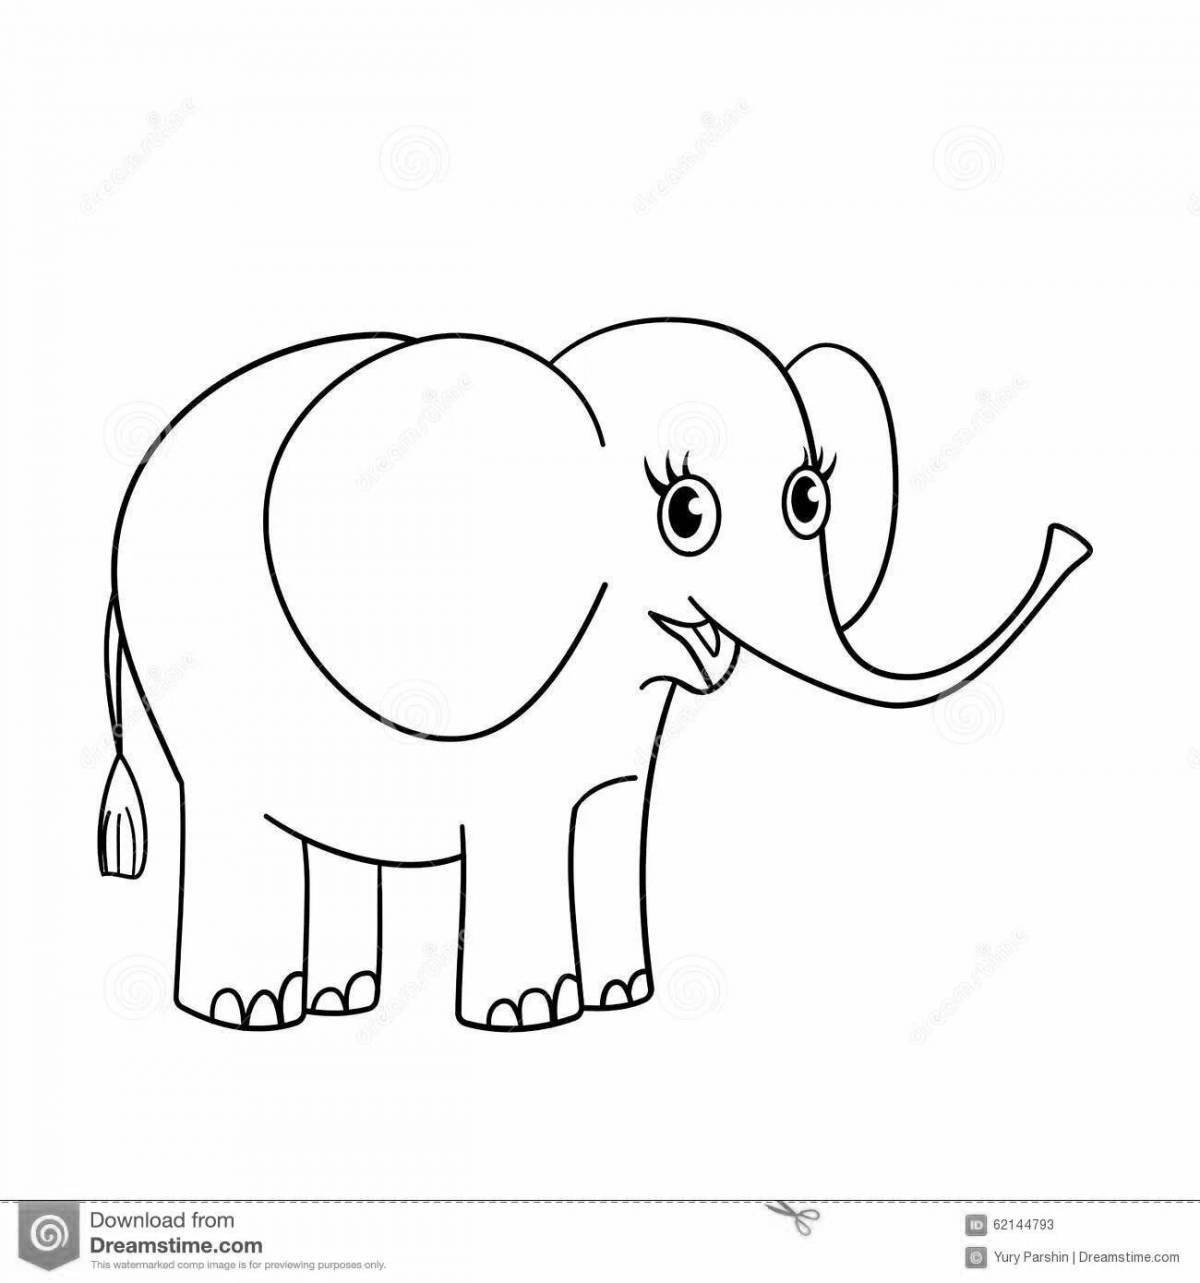 Coloring book magnificent elephant